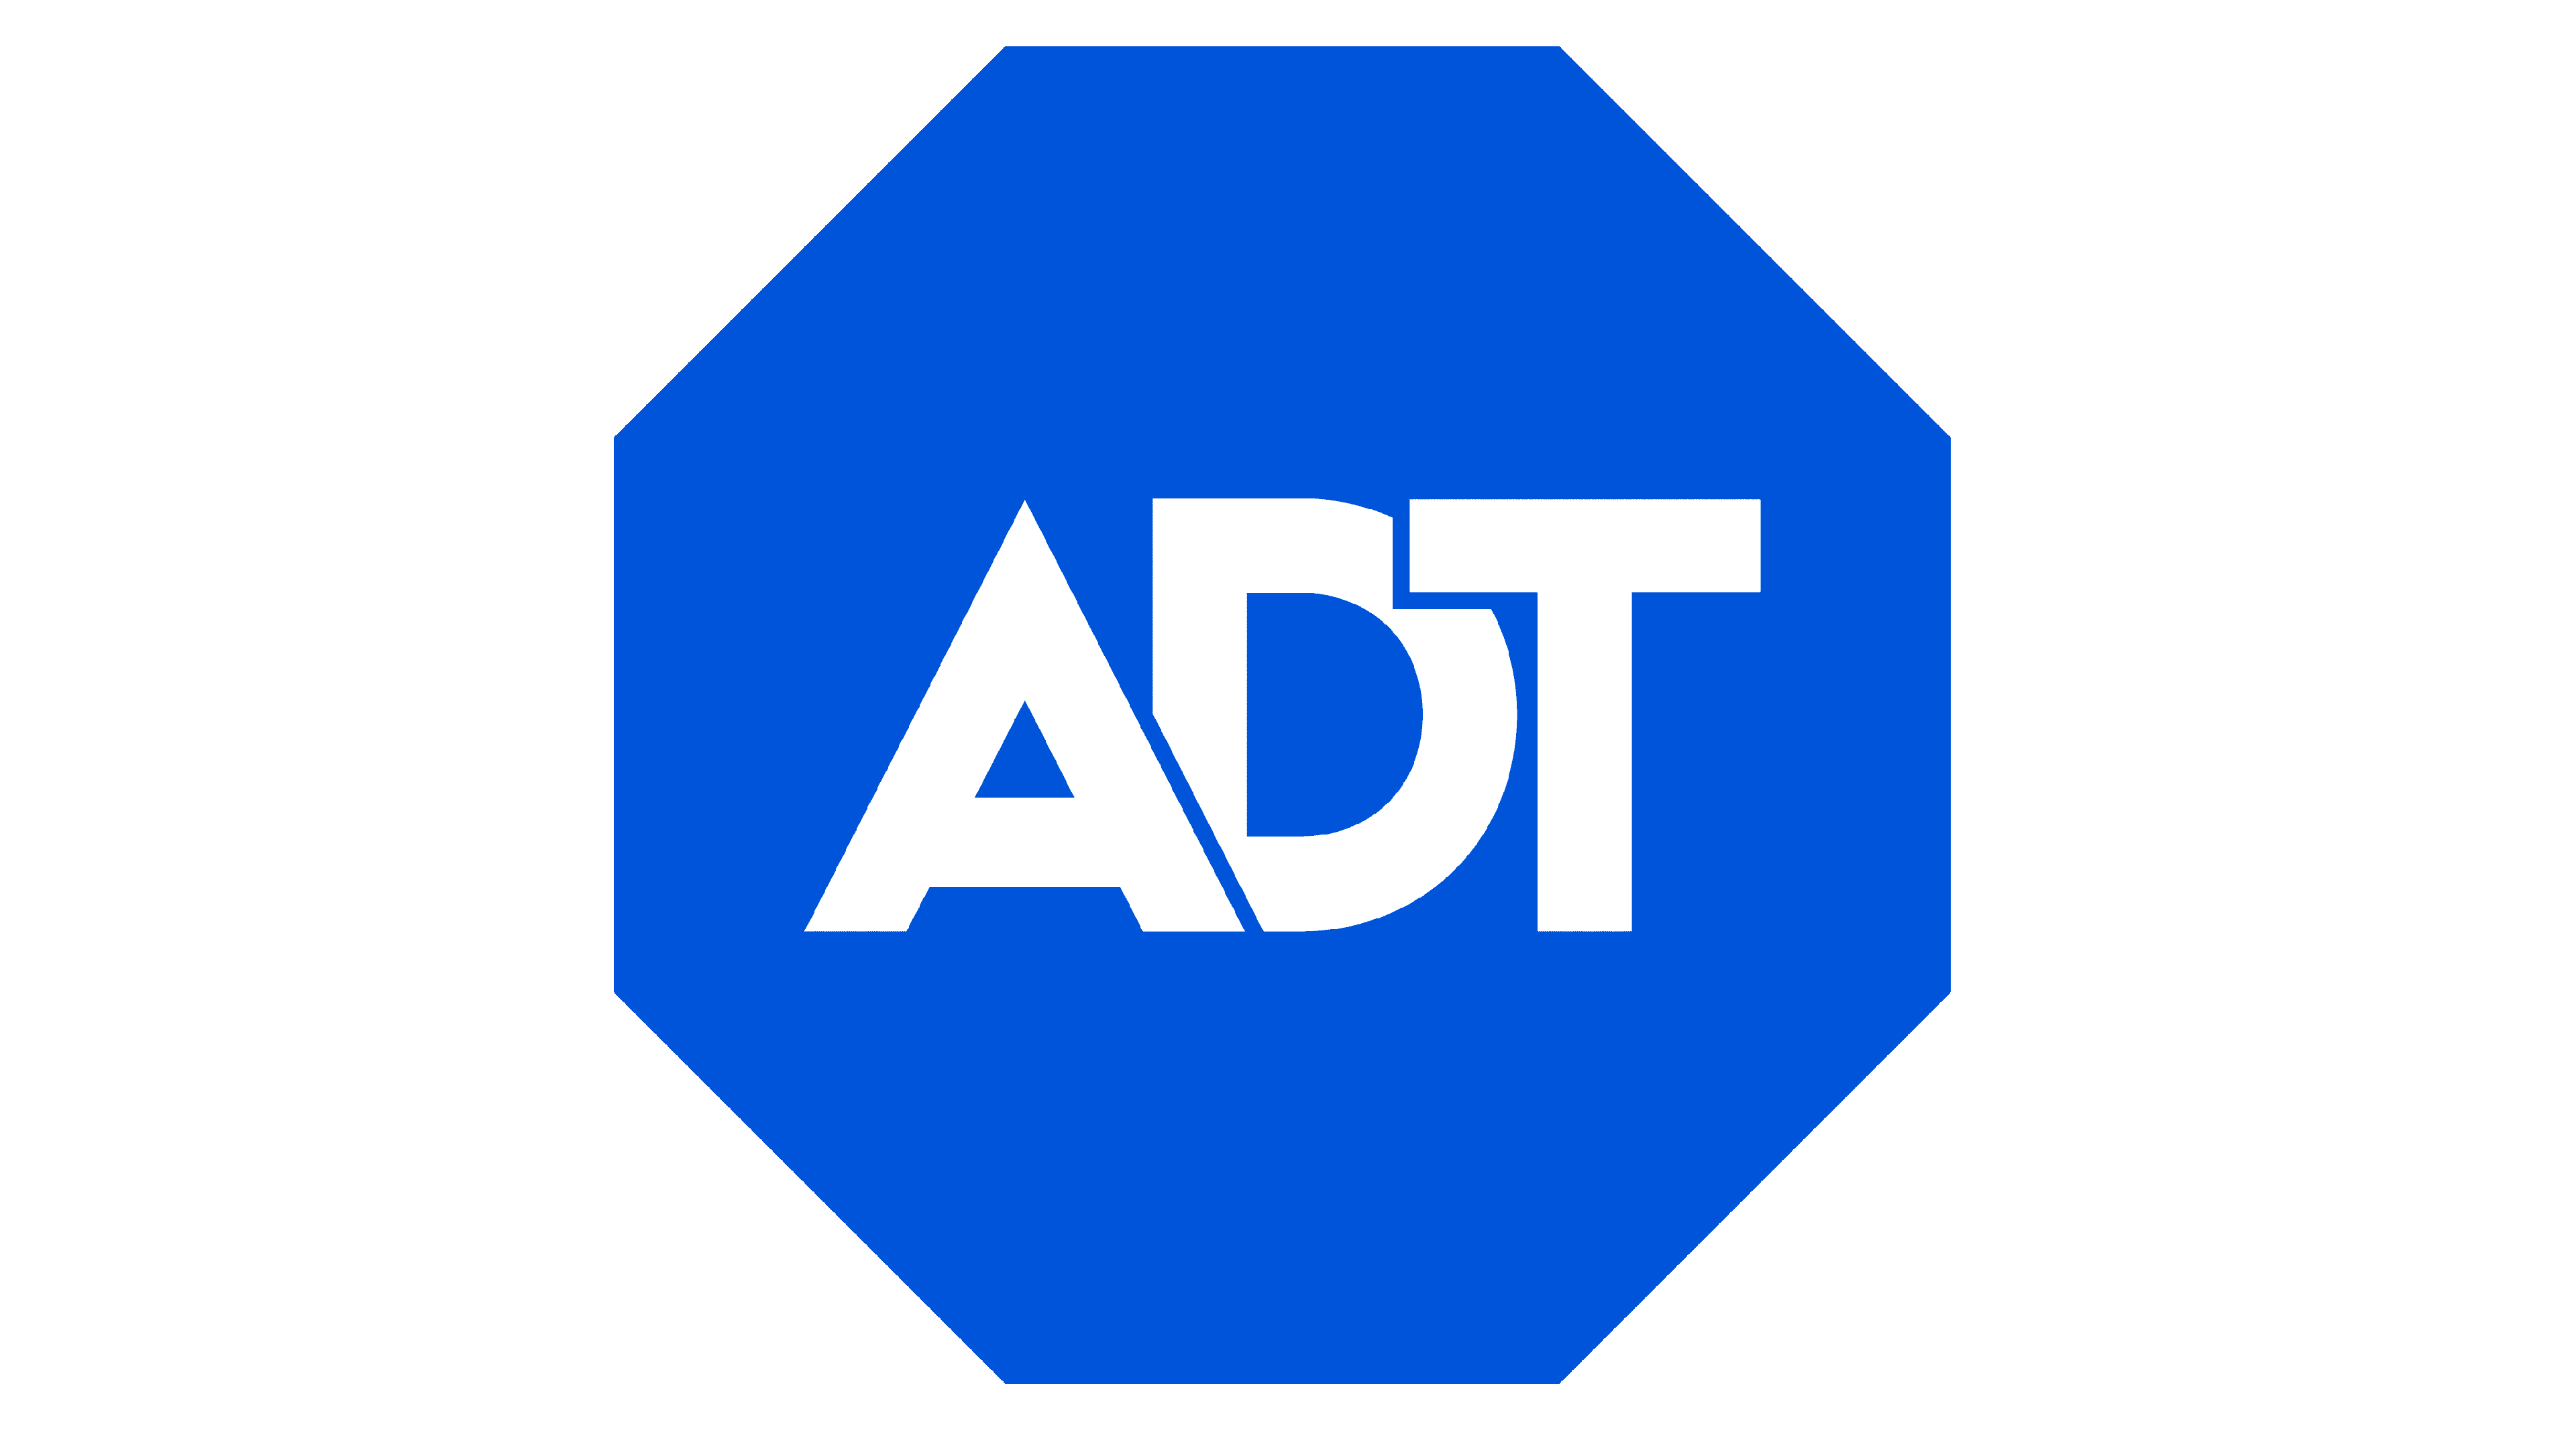 ADT logo, best business security systems